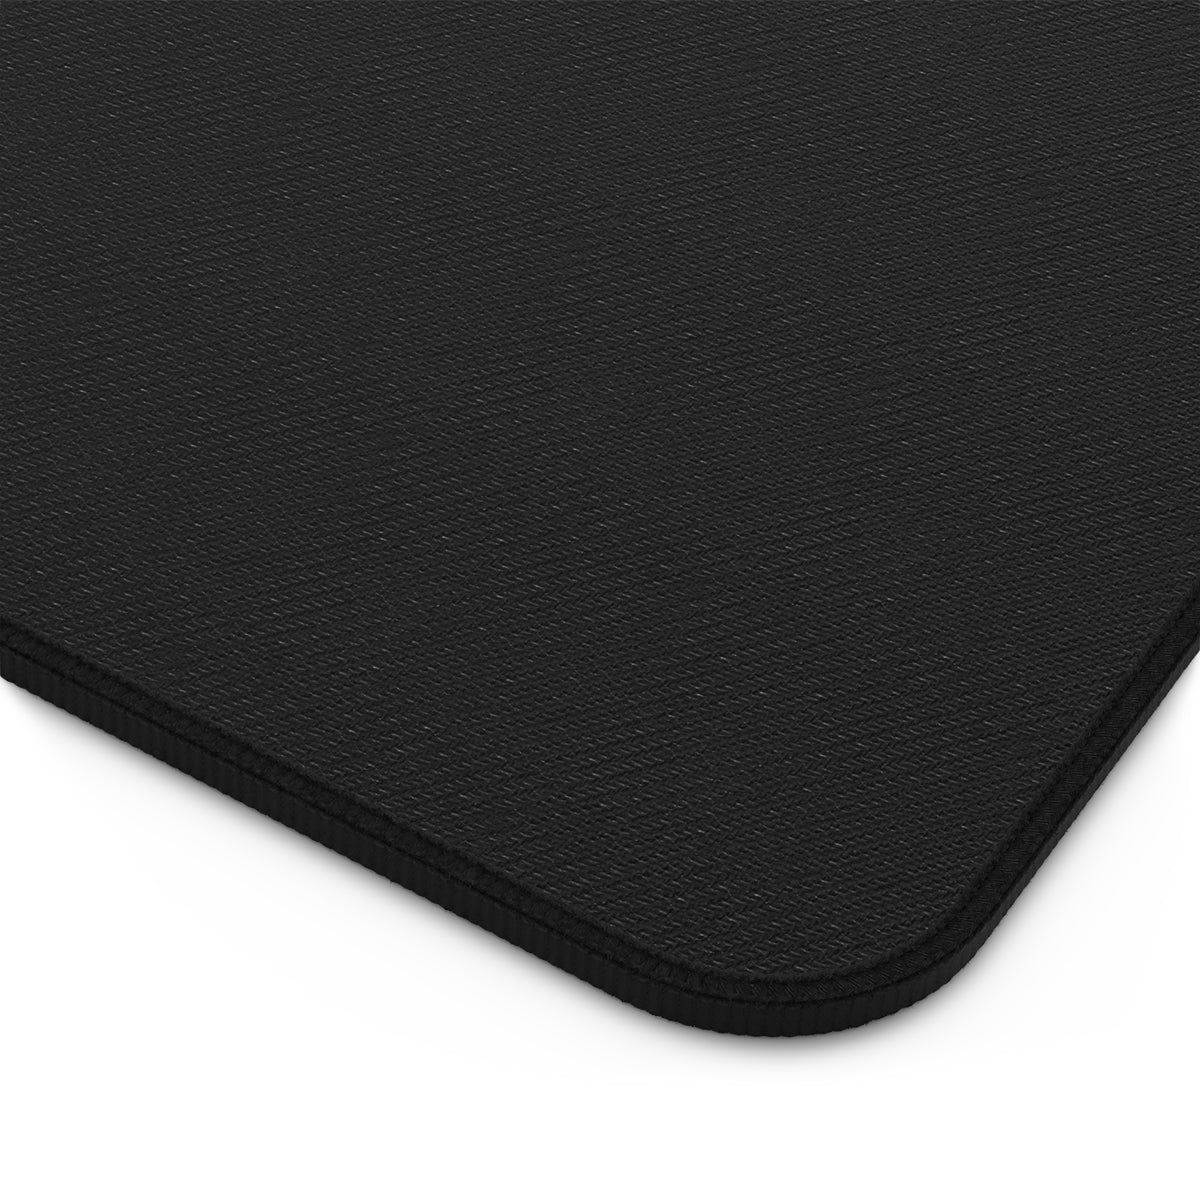 Customizable Desk Mat - All Over Print or Single Design Placement